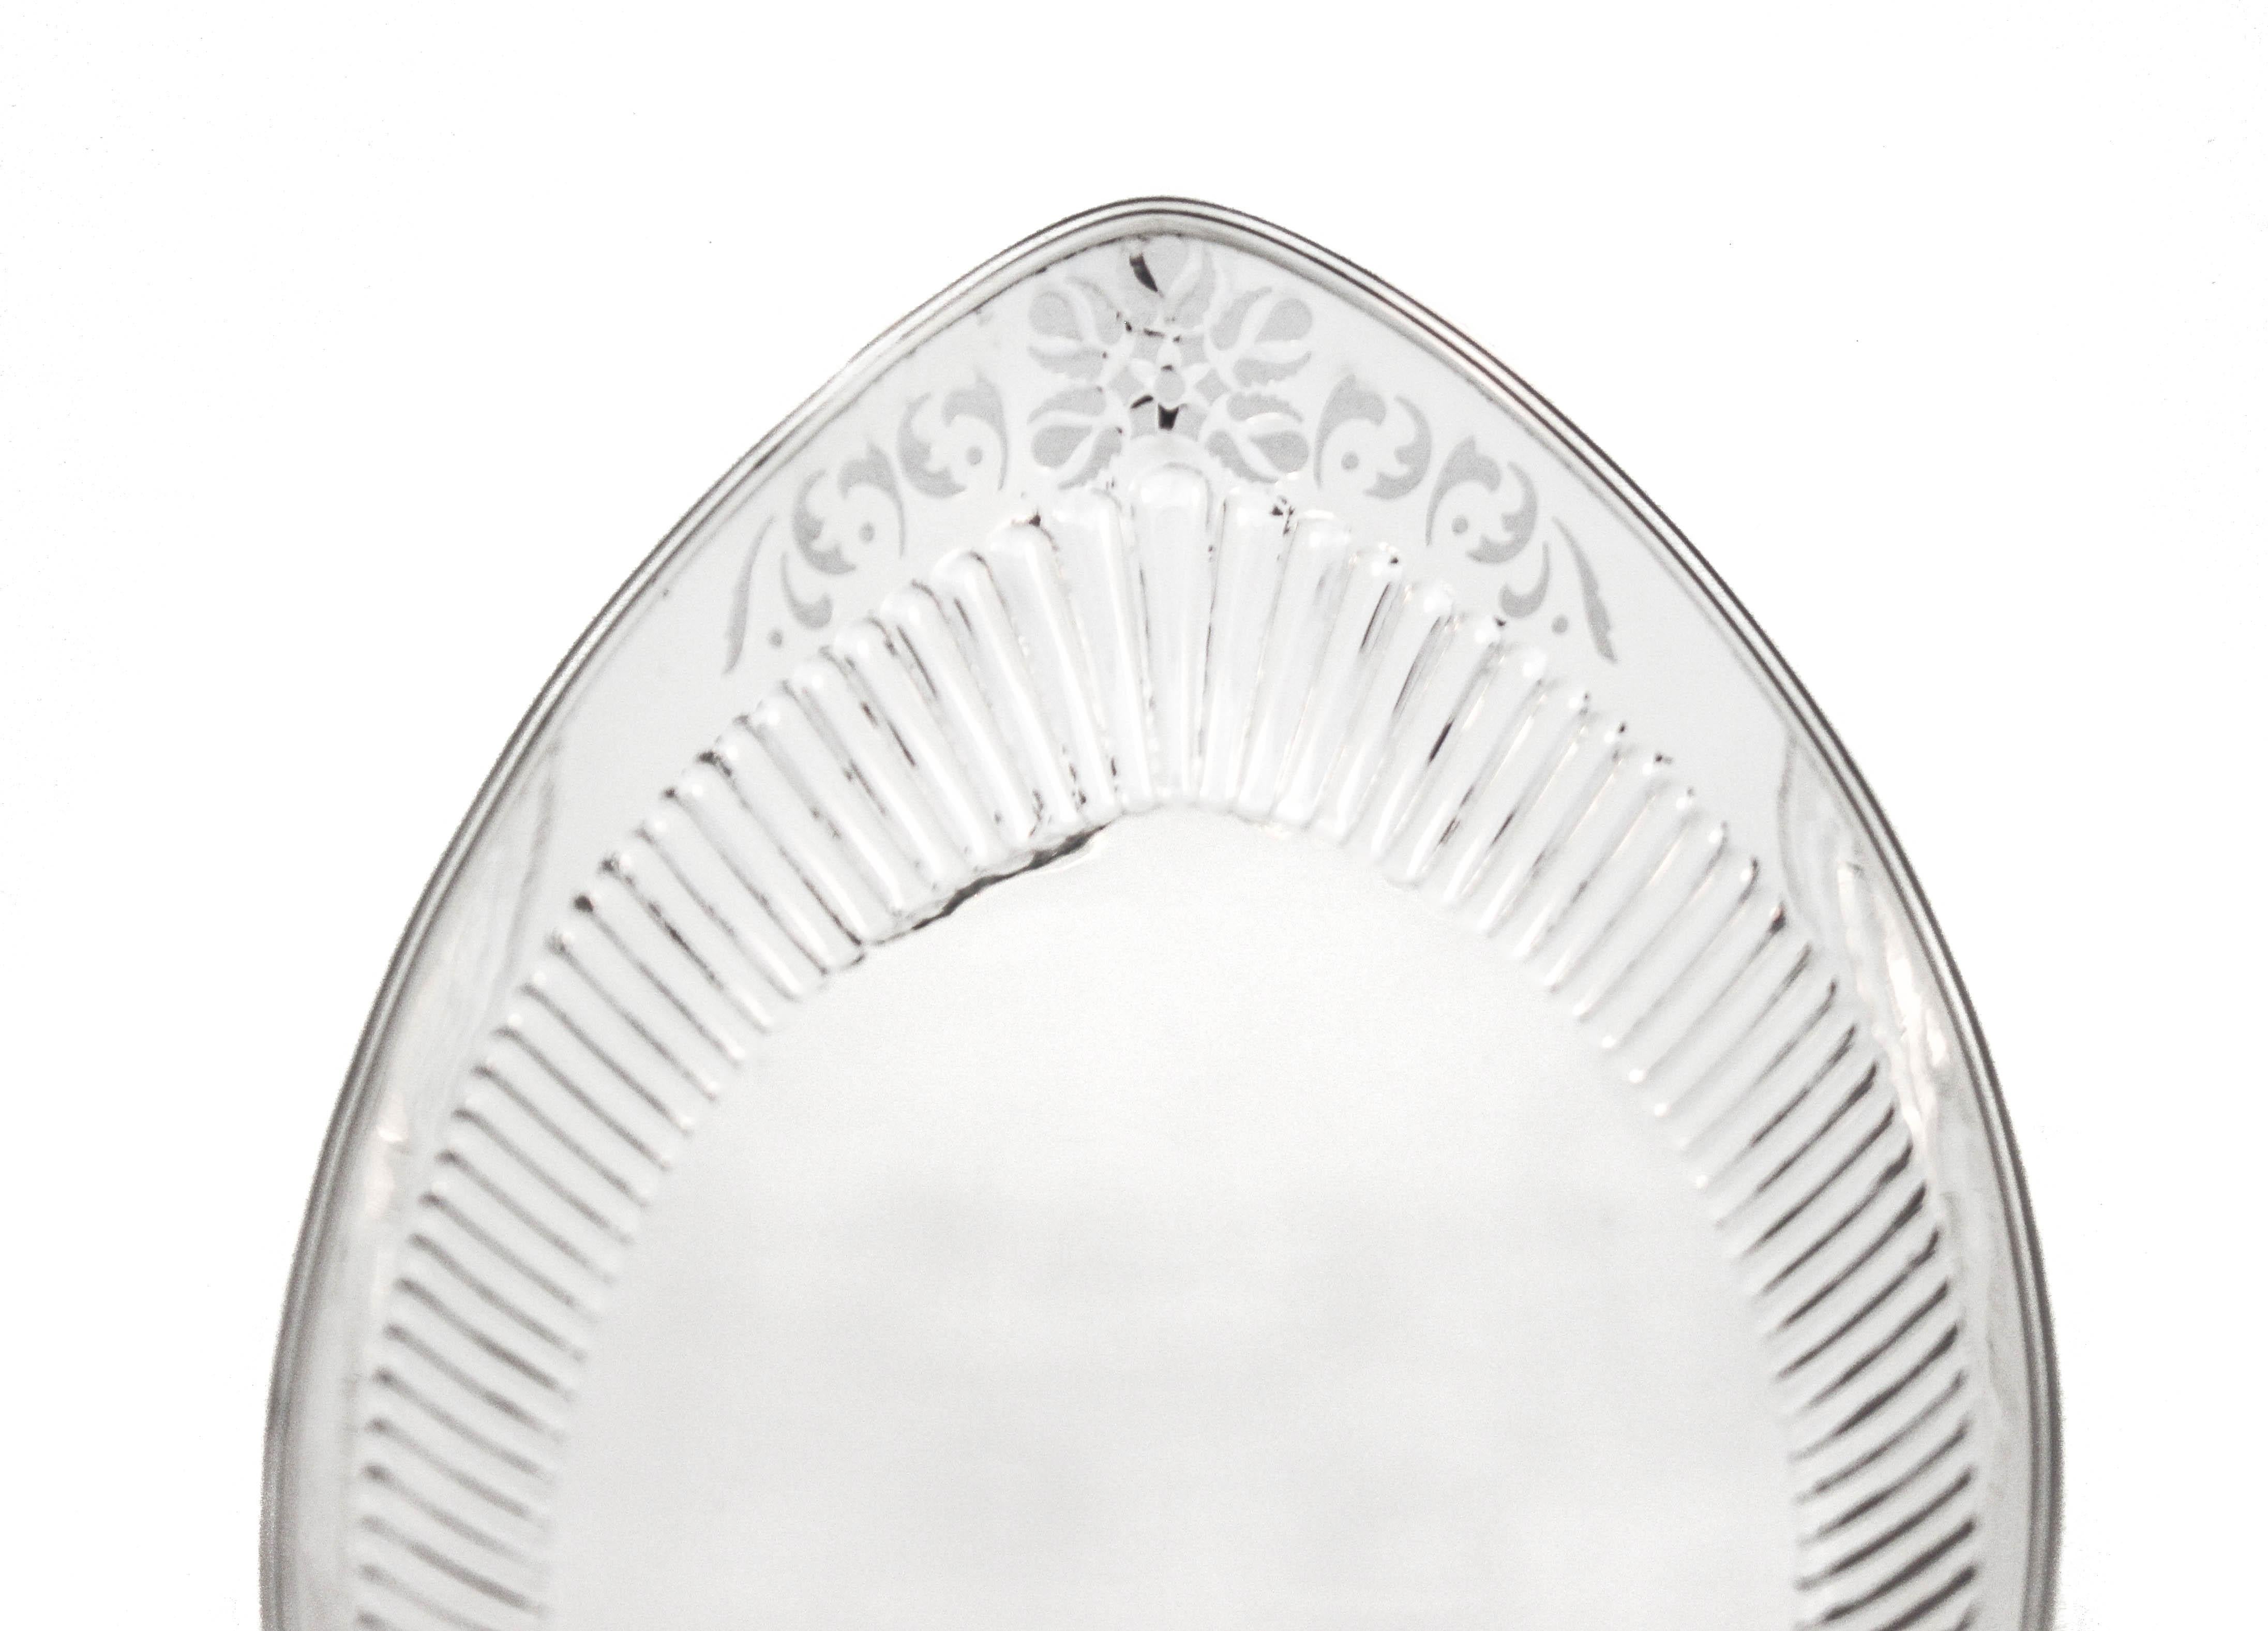 Being offered is a sterling silver breadbasket by Gorham Silversmiths of Providence, Rhode Island.  In addition to the sterling and Gorham hallmarks, it is signed (hallmarked)1911.  It has ridges along around the interior and a cutout design on each